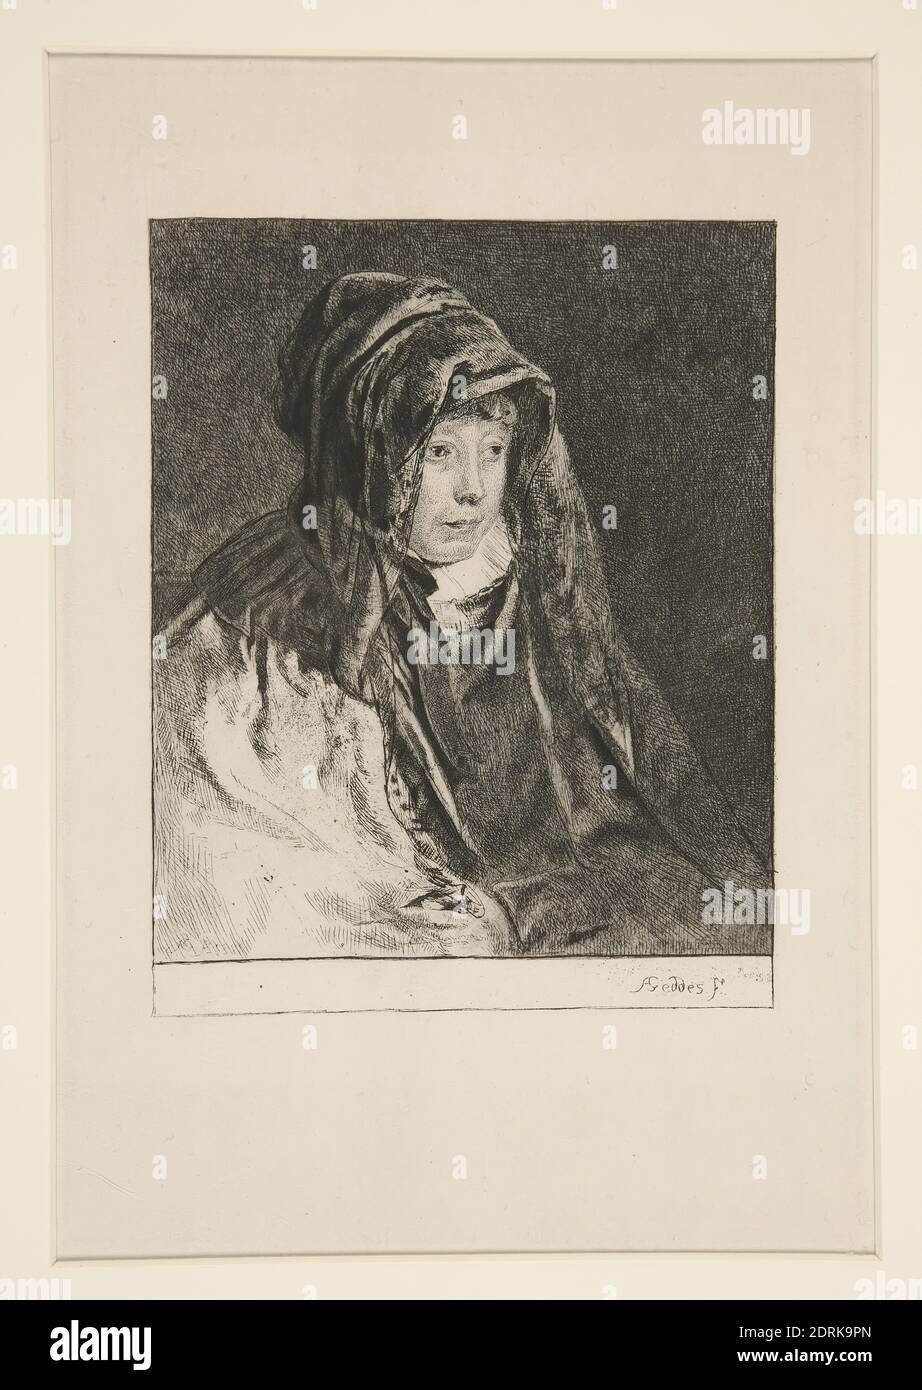 Artist: Andrew Geddes, British, 1783–1844, Agnes Geddes, the Artist’s Mother, Drypoint, Image: 15.9 × 12.3 cm (6 1/4 × 4 13/16 in.); Sheet: 37.8 × 27 cm (14 7/8 × 10 5/8 in.), Made in United Kingdom, British, 19th century, Works on Paper - Prints Stock Photo